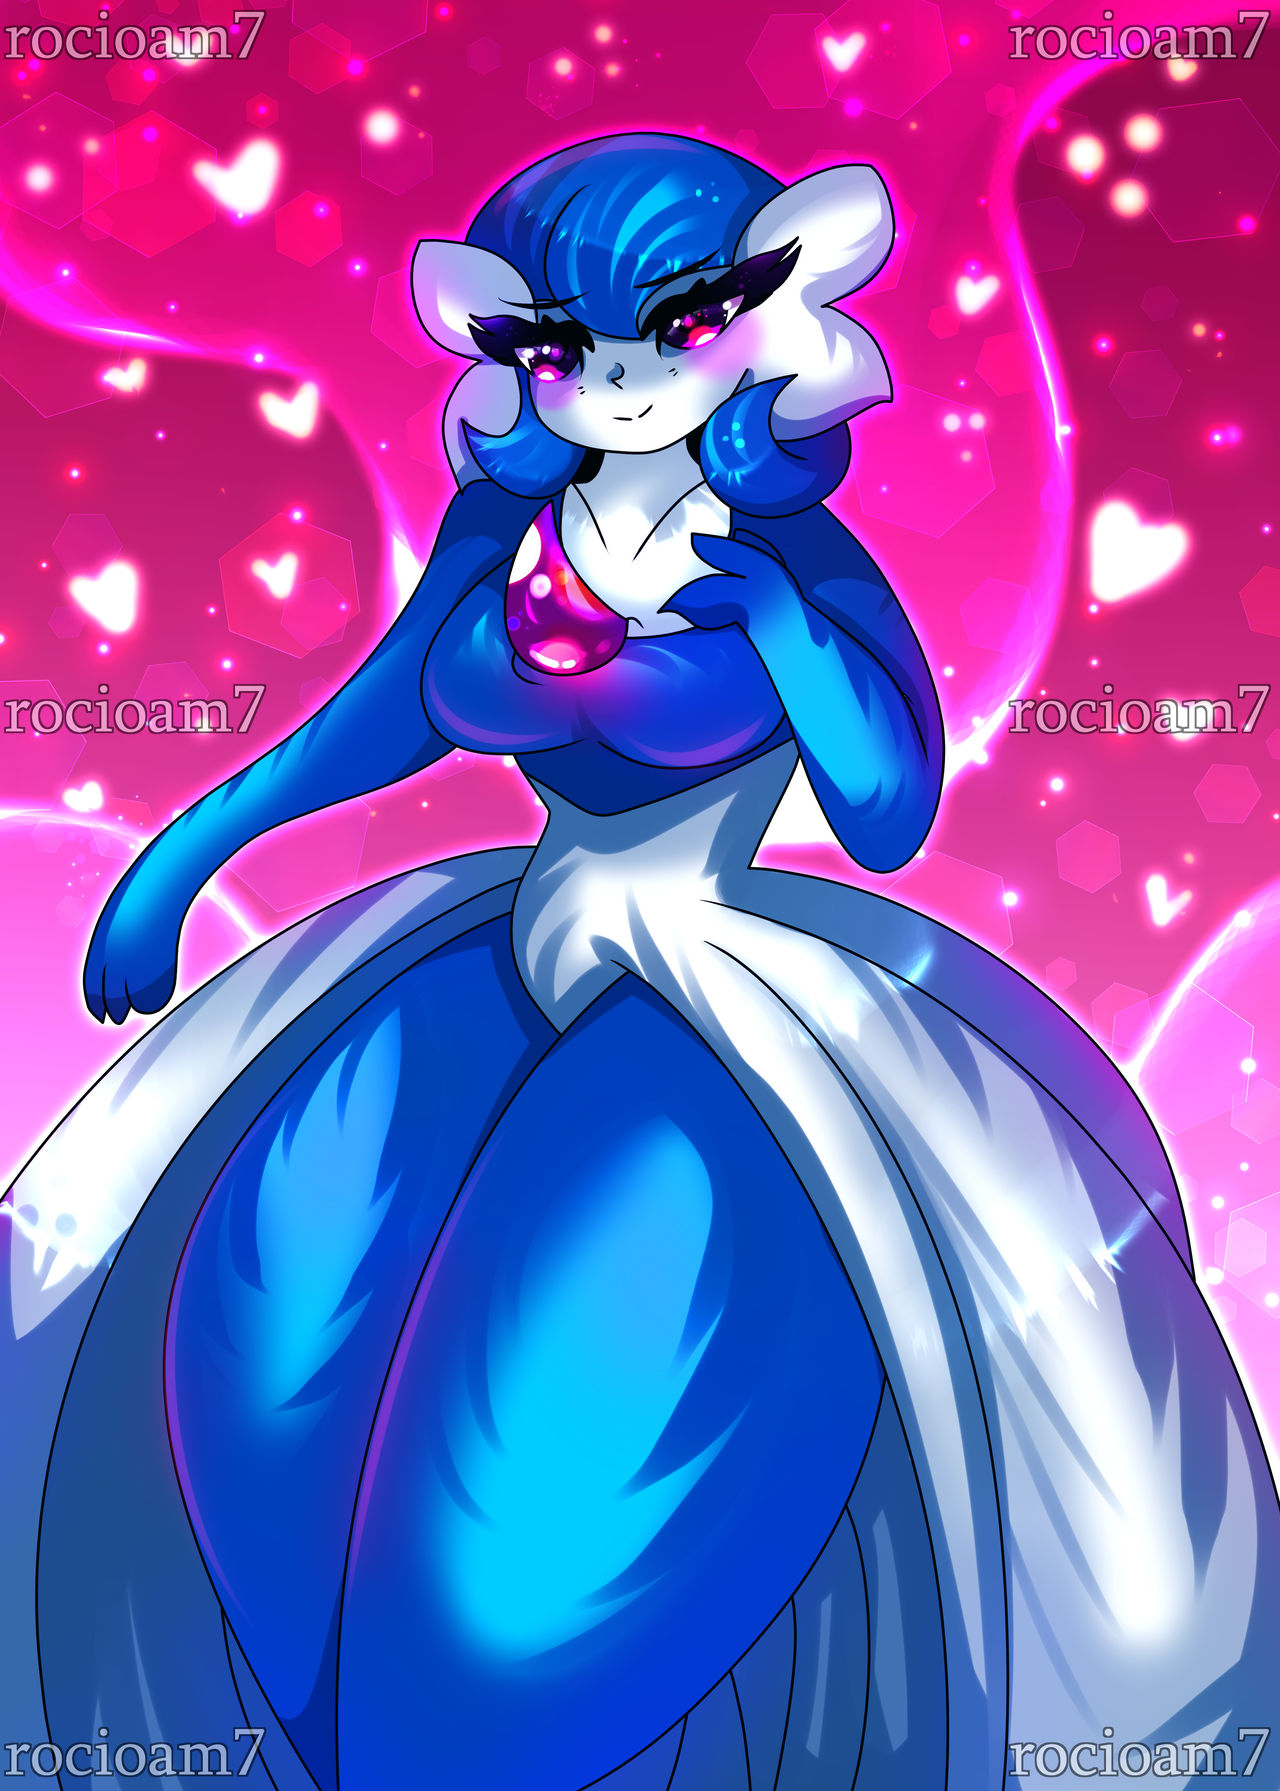 HikariNio on X: @Touyarokii even fangames have awesome blue shinies. you  should check out Pokemon Reborn! they have custom shinies! this is my shiny  Gardevoir.  / X